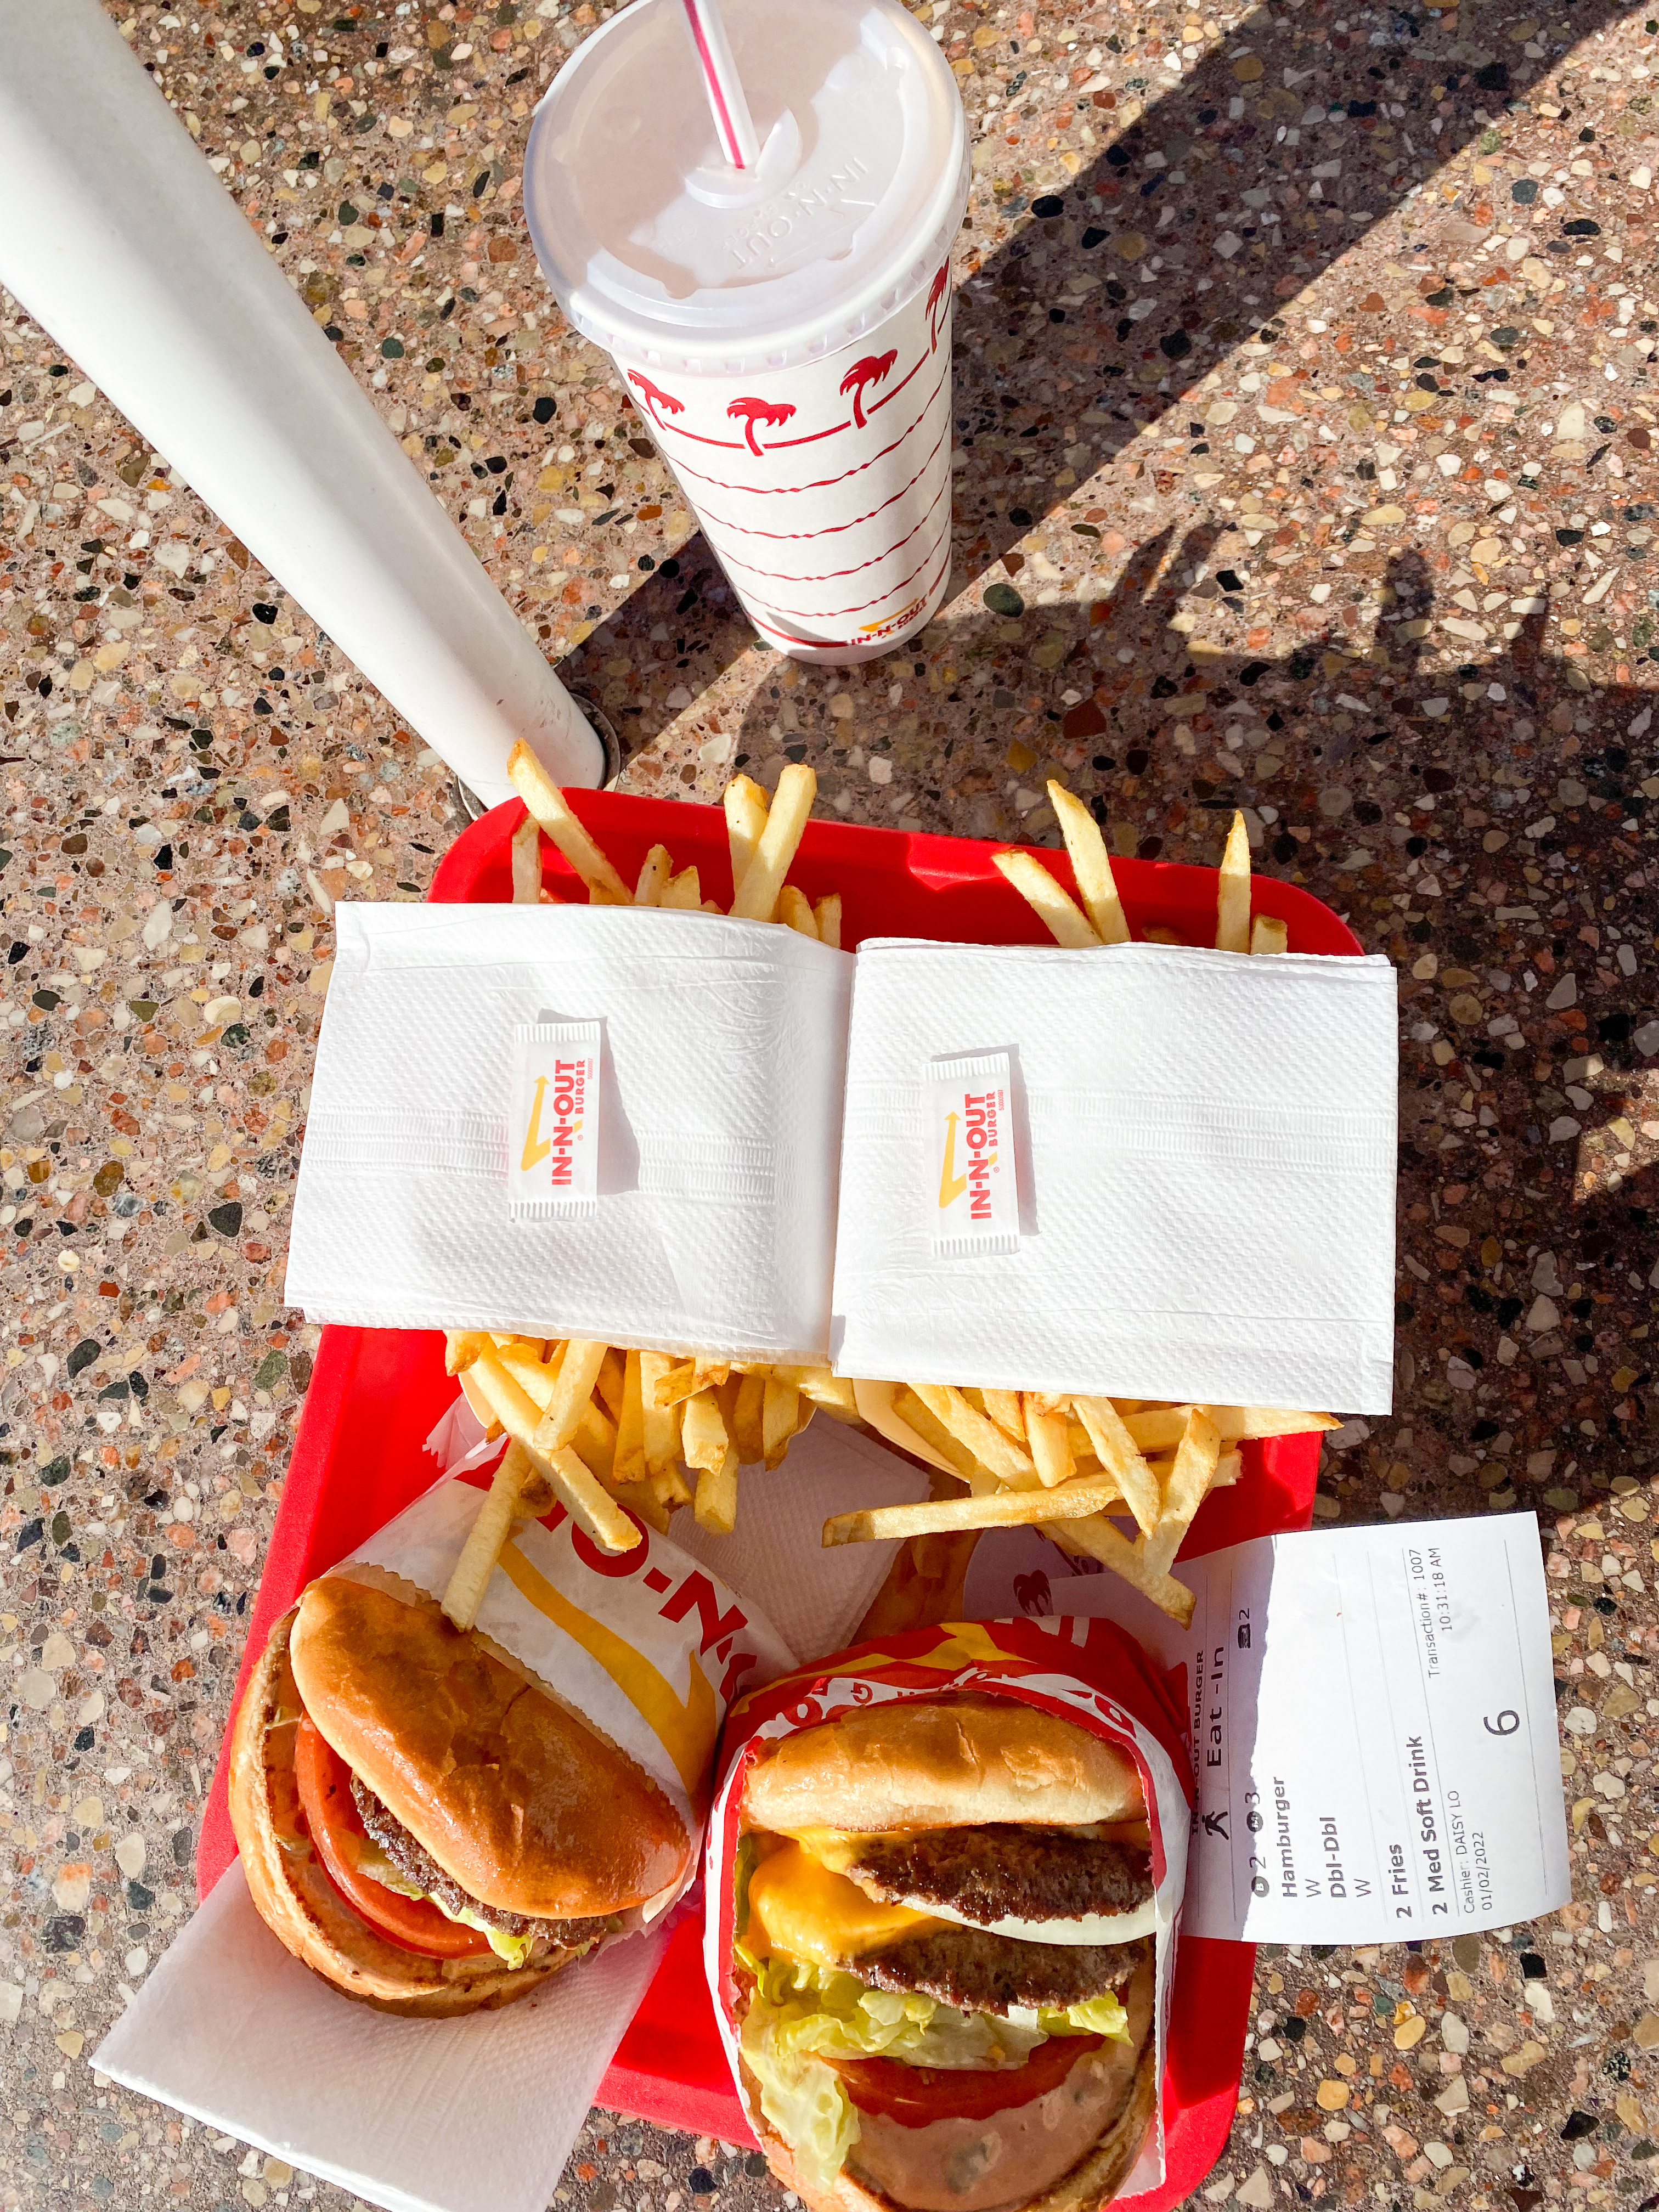 in n out burgers, fries